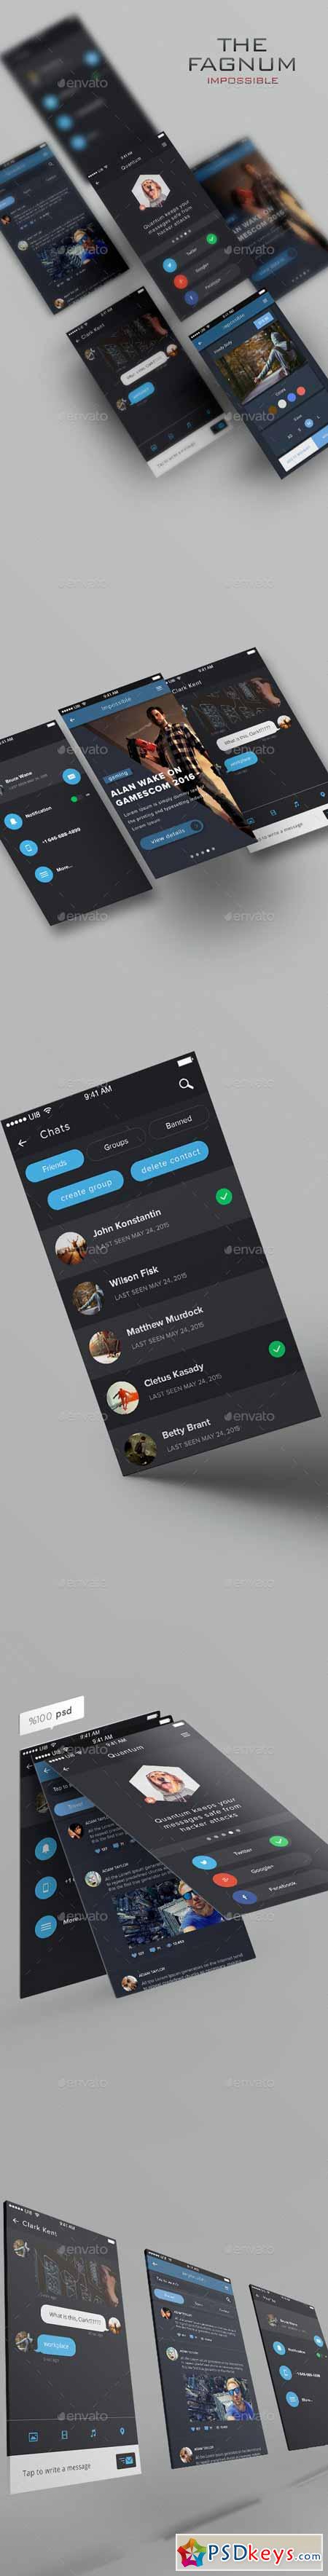 Impossible - Phone UI UX Template 11785554